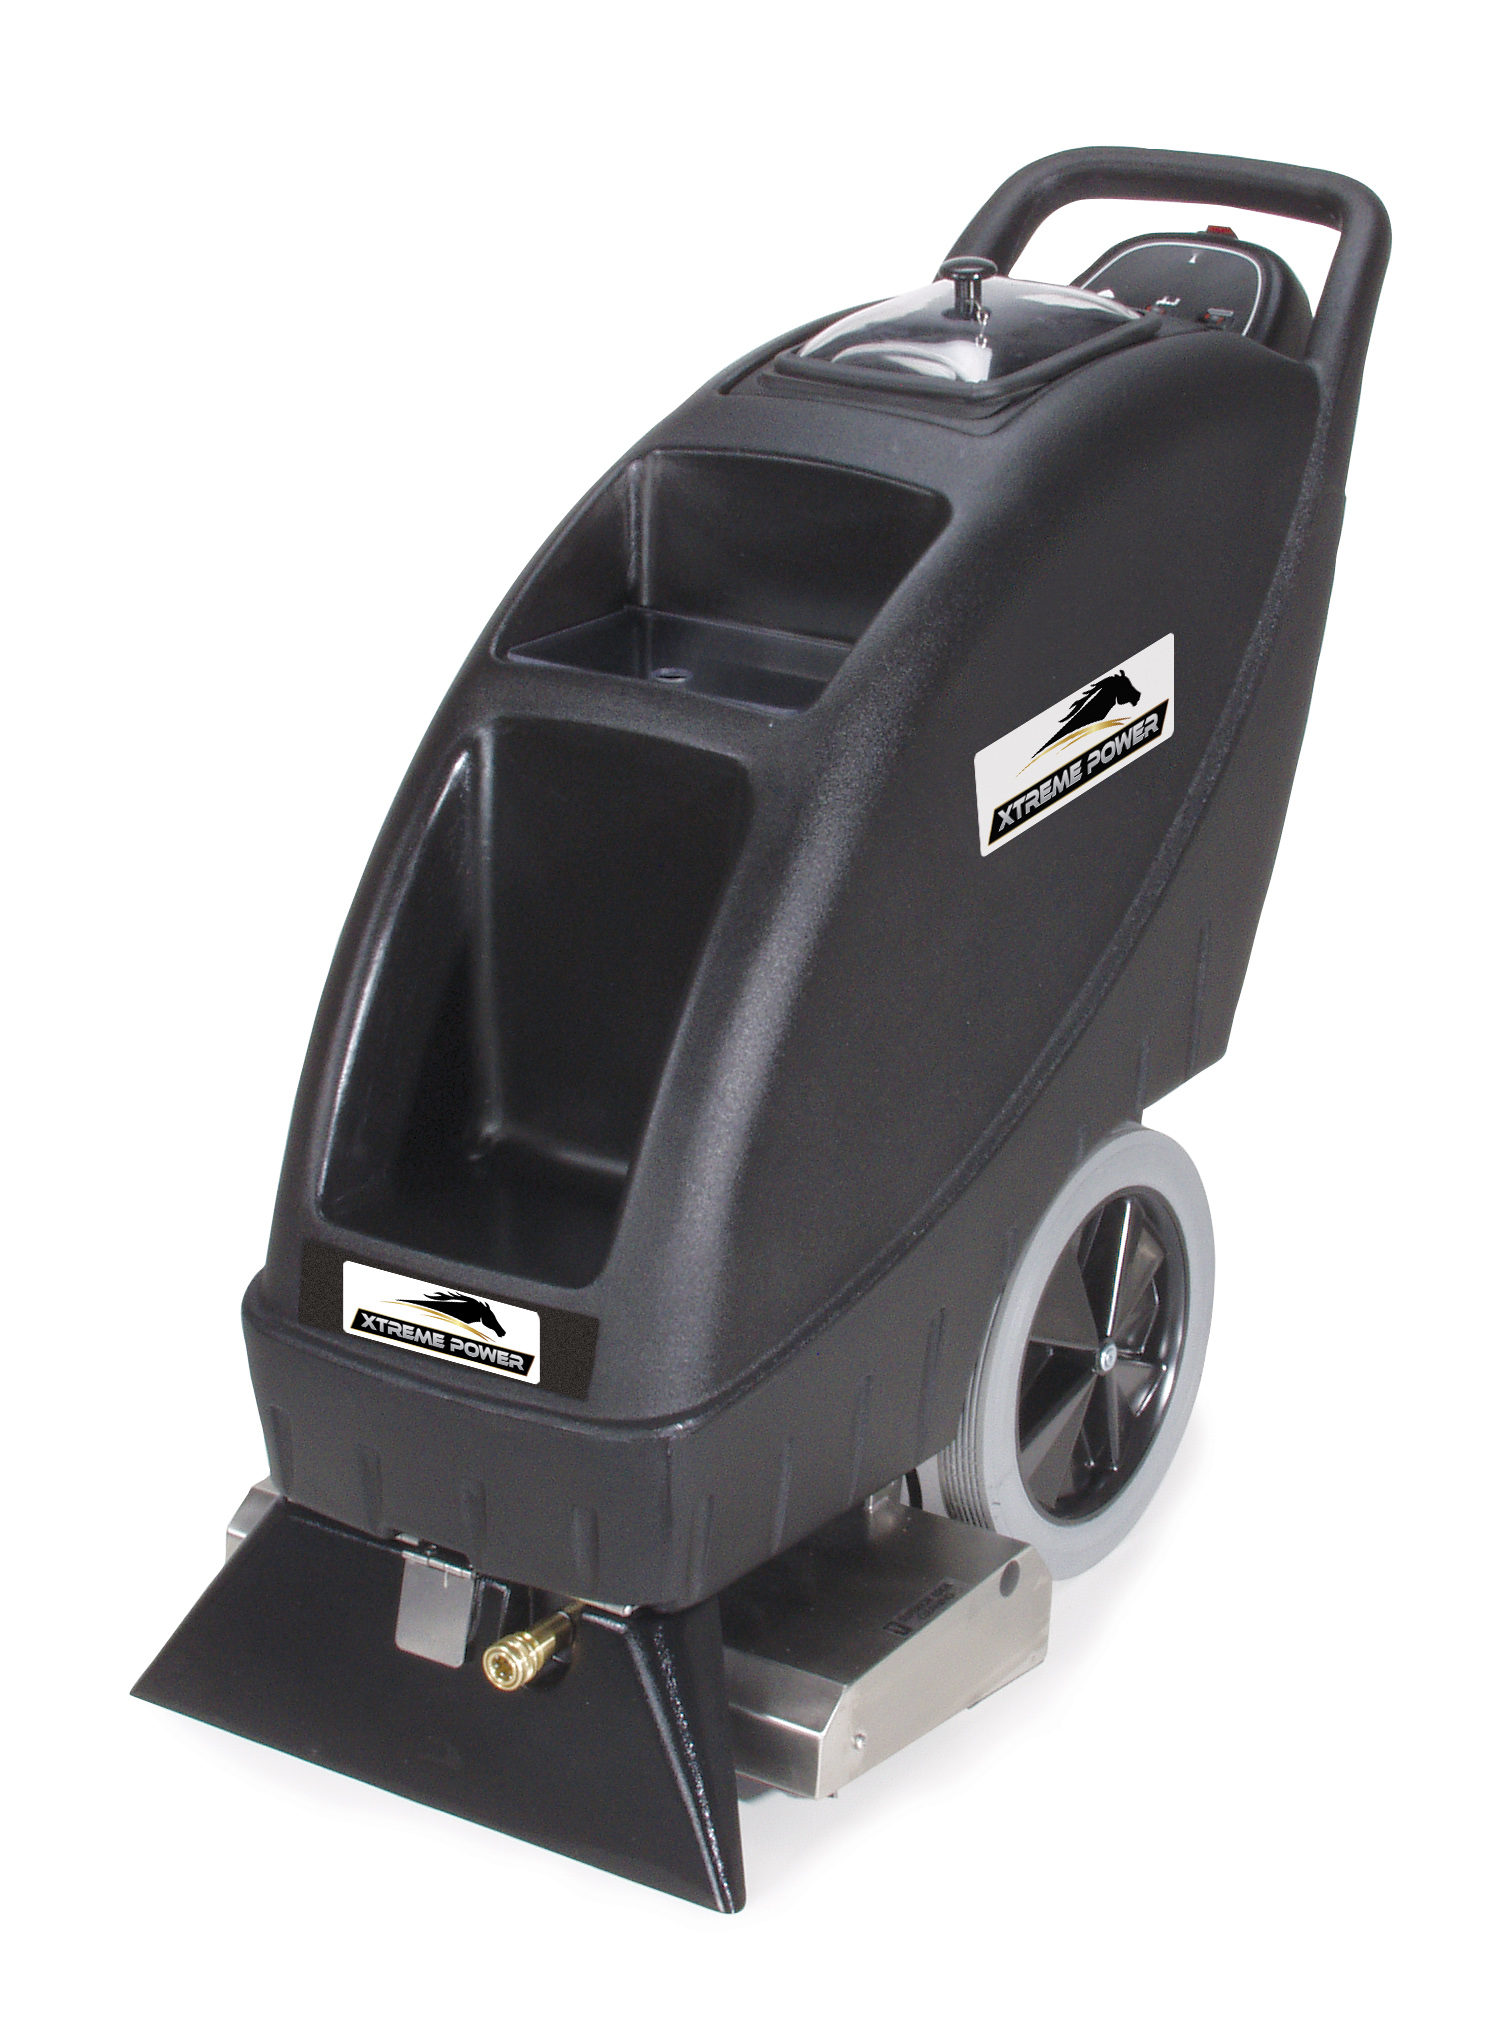 used carpet extractor machine for sale